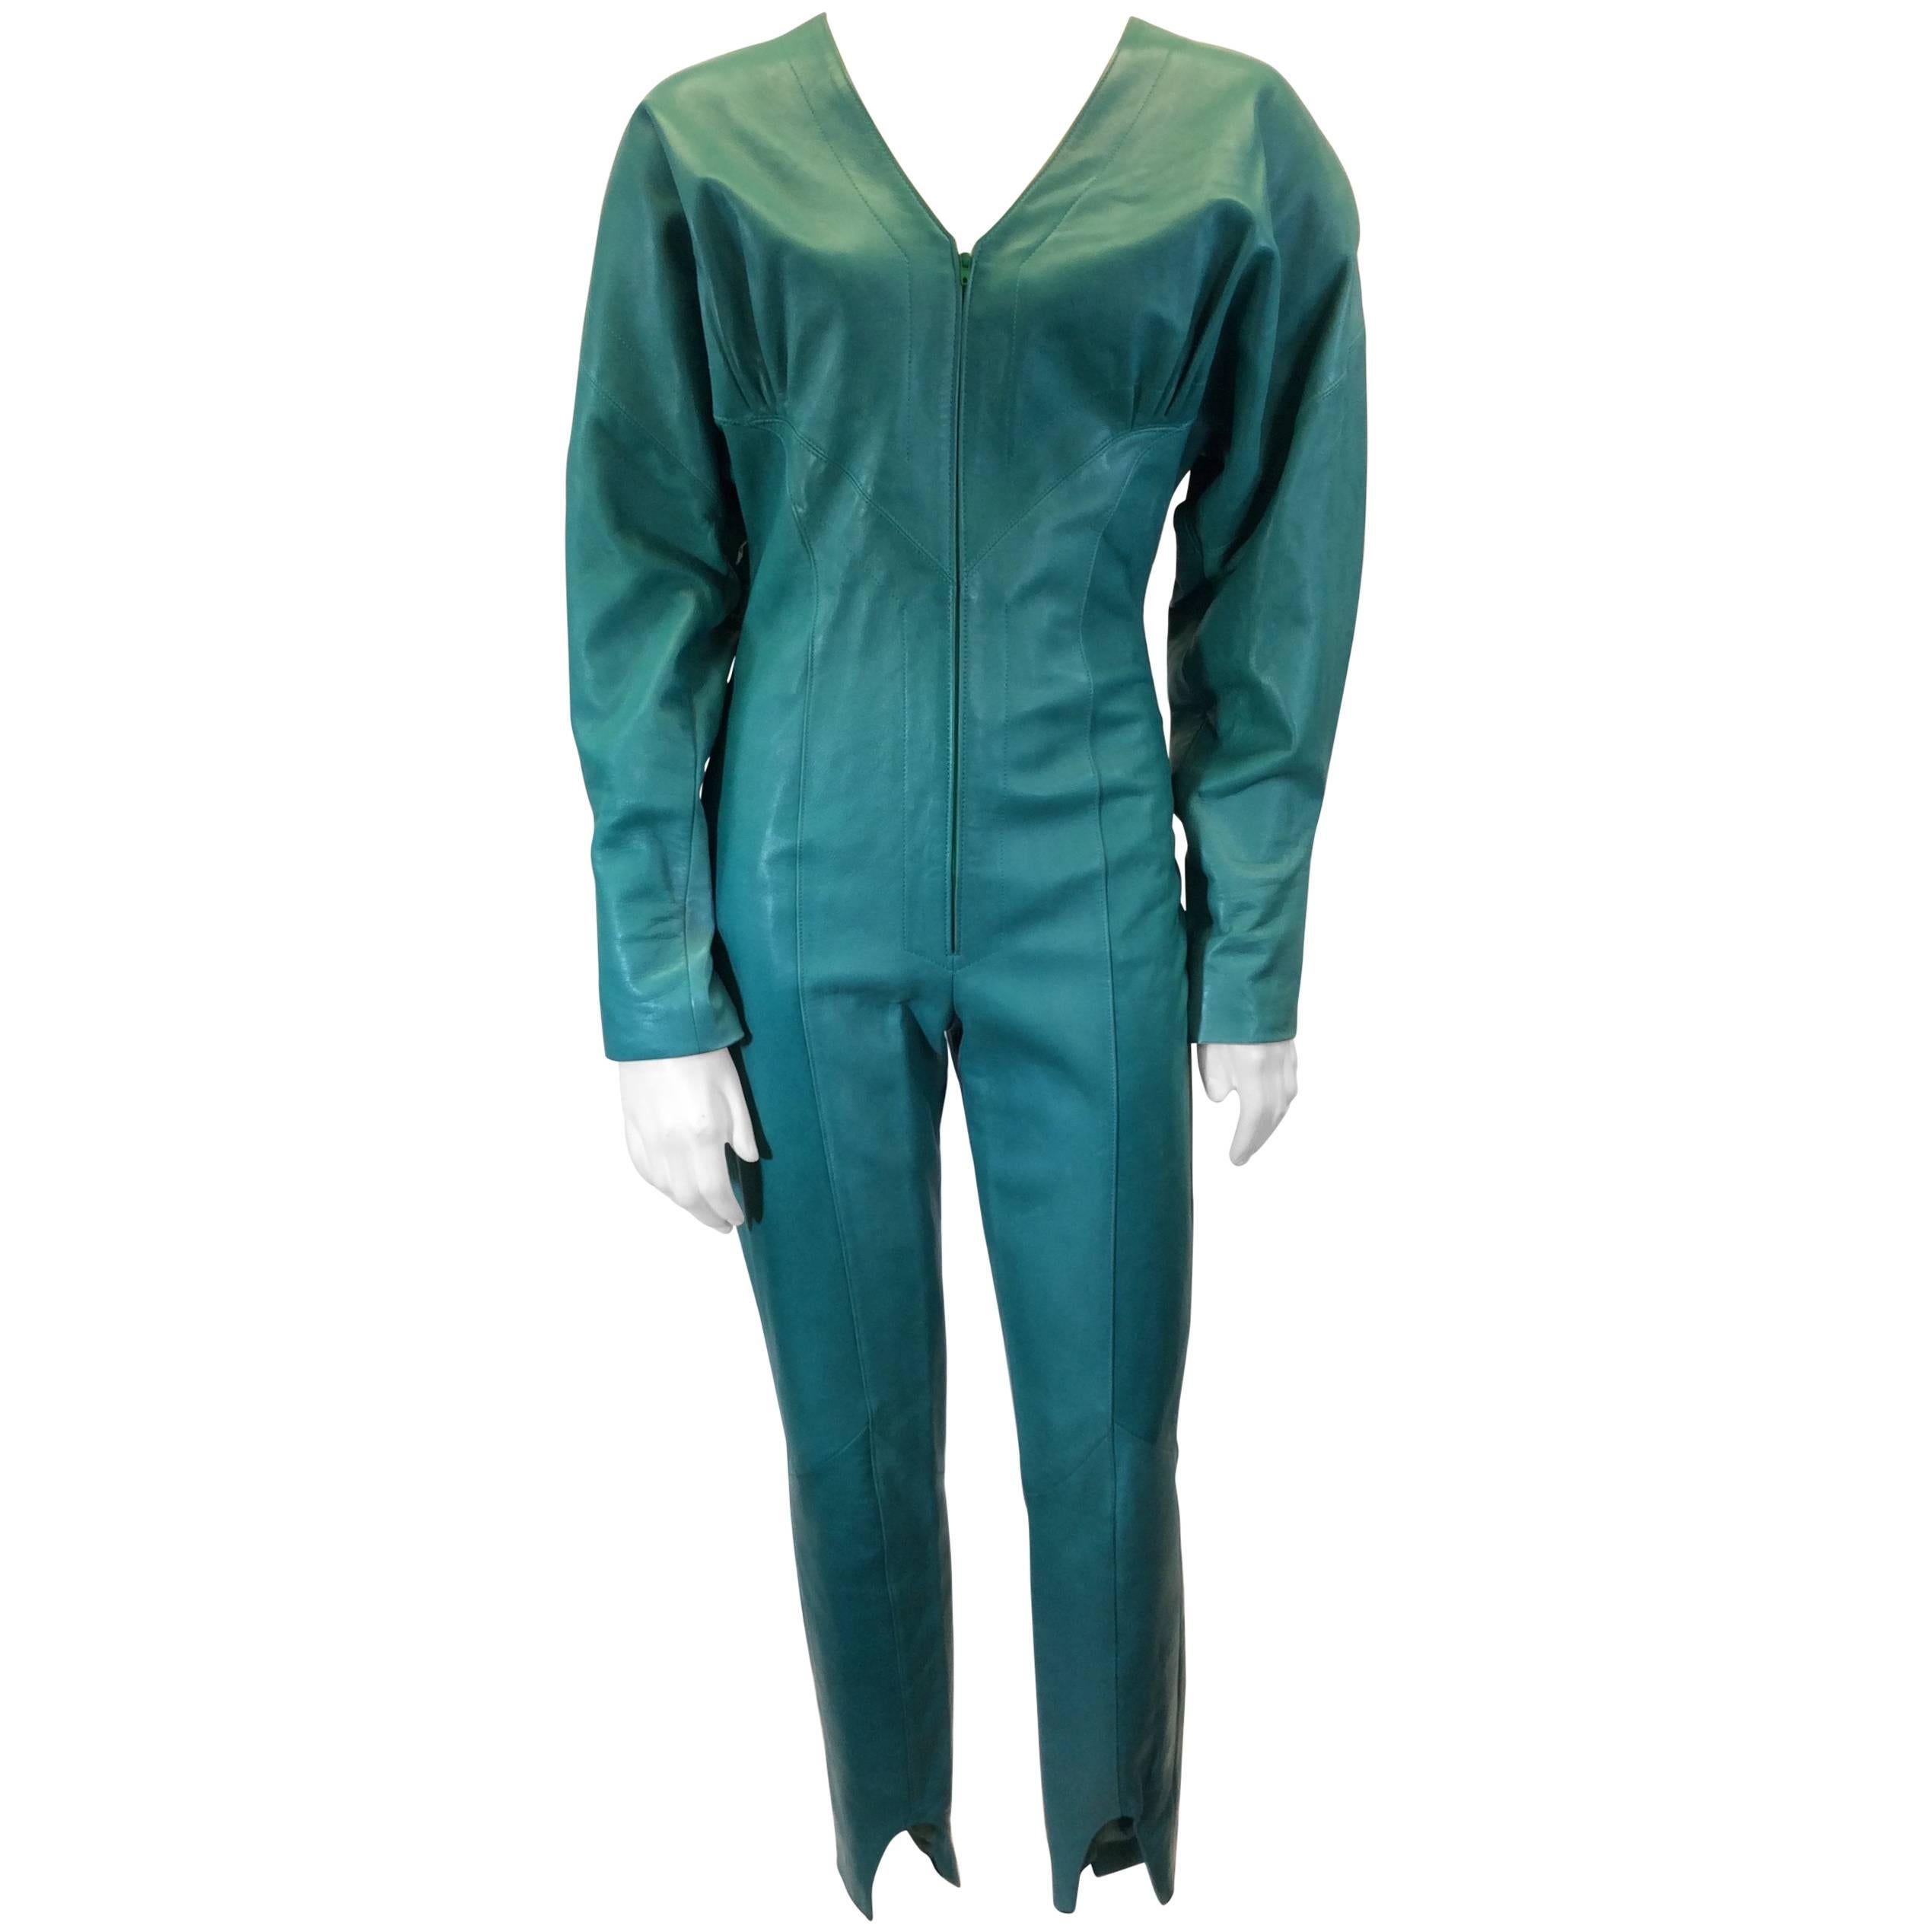 Jean Claude Jitrois Teal Vintage Leather Full Body Jumpsuit For Sale